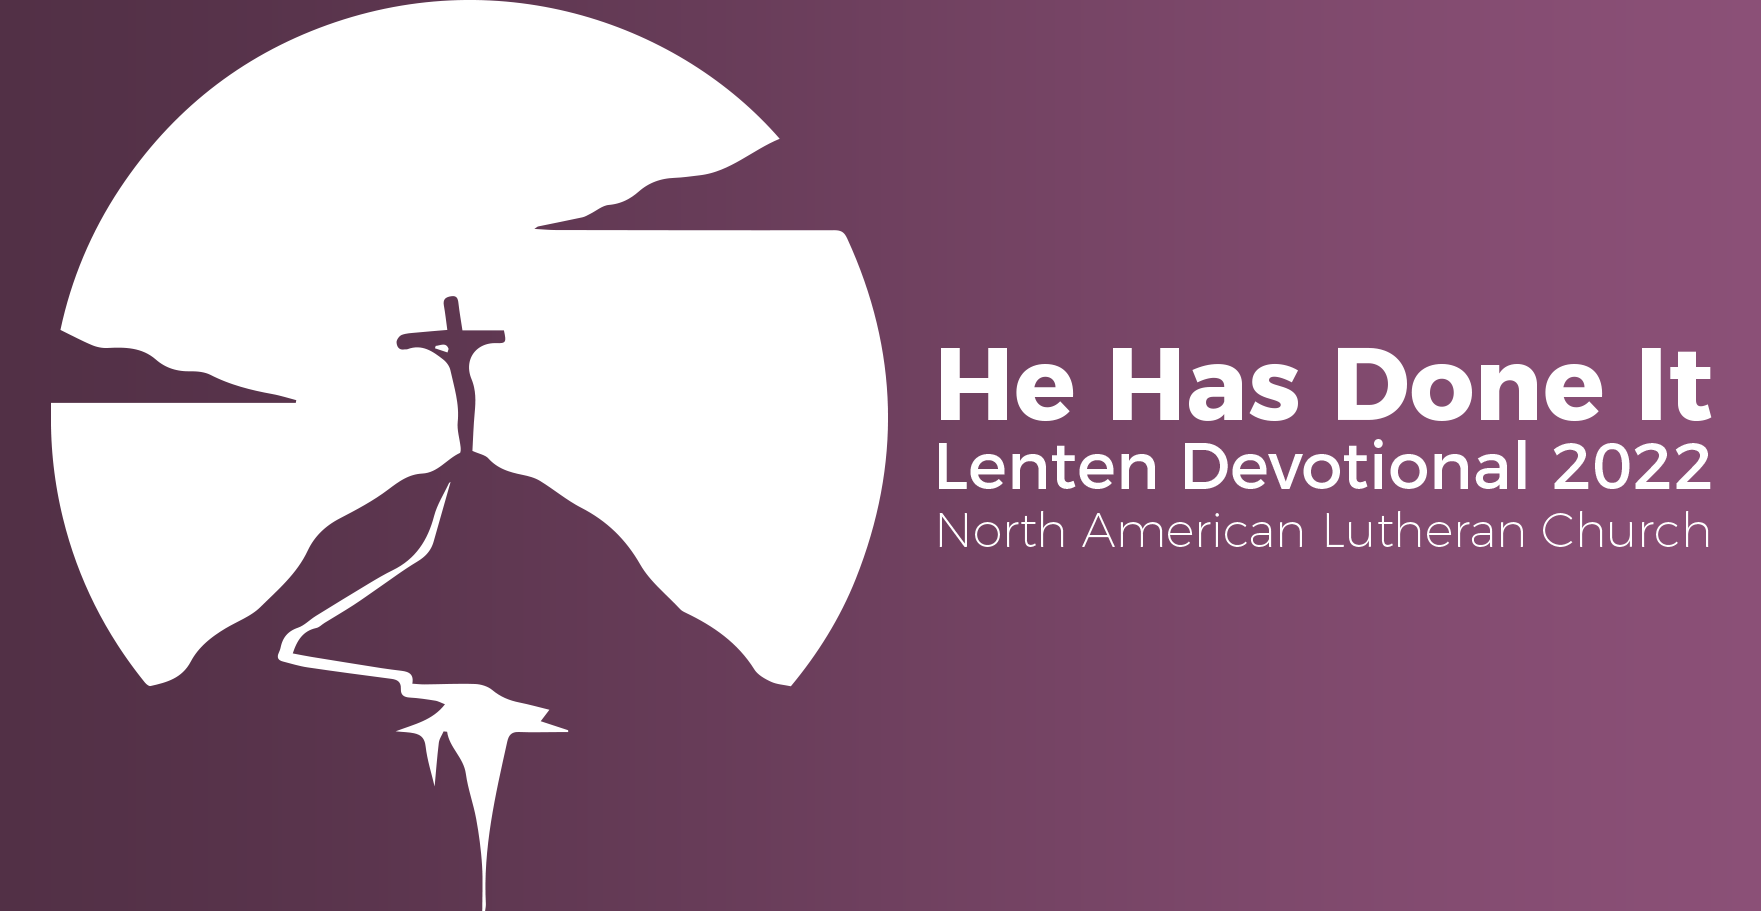 March 8, 2022 | Tuesday of the Week of Lent I